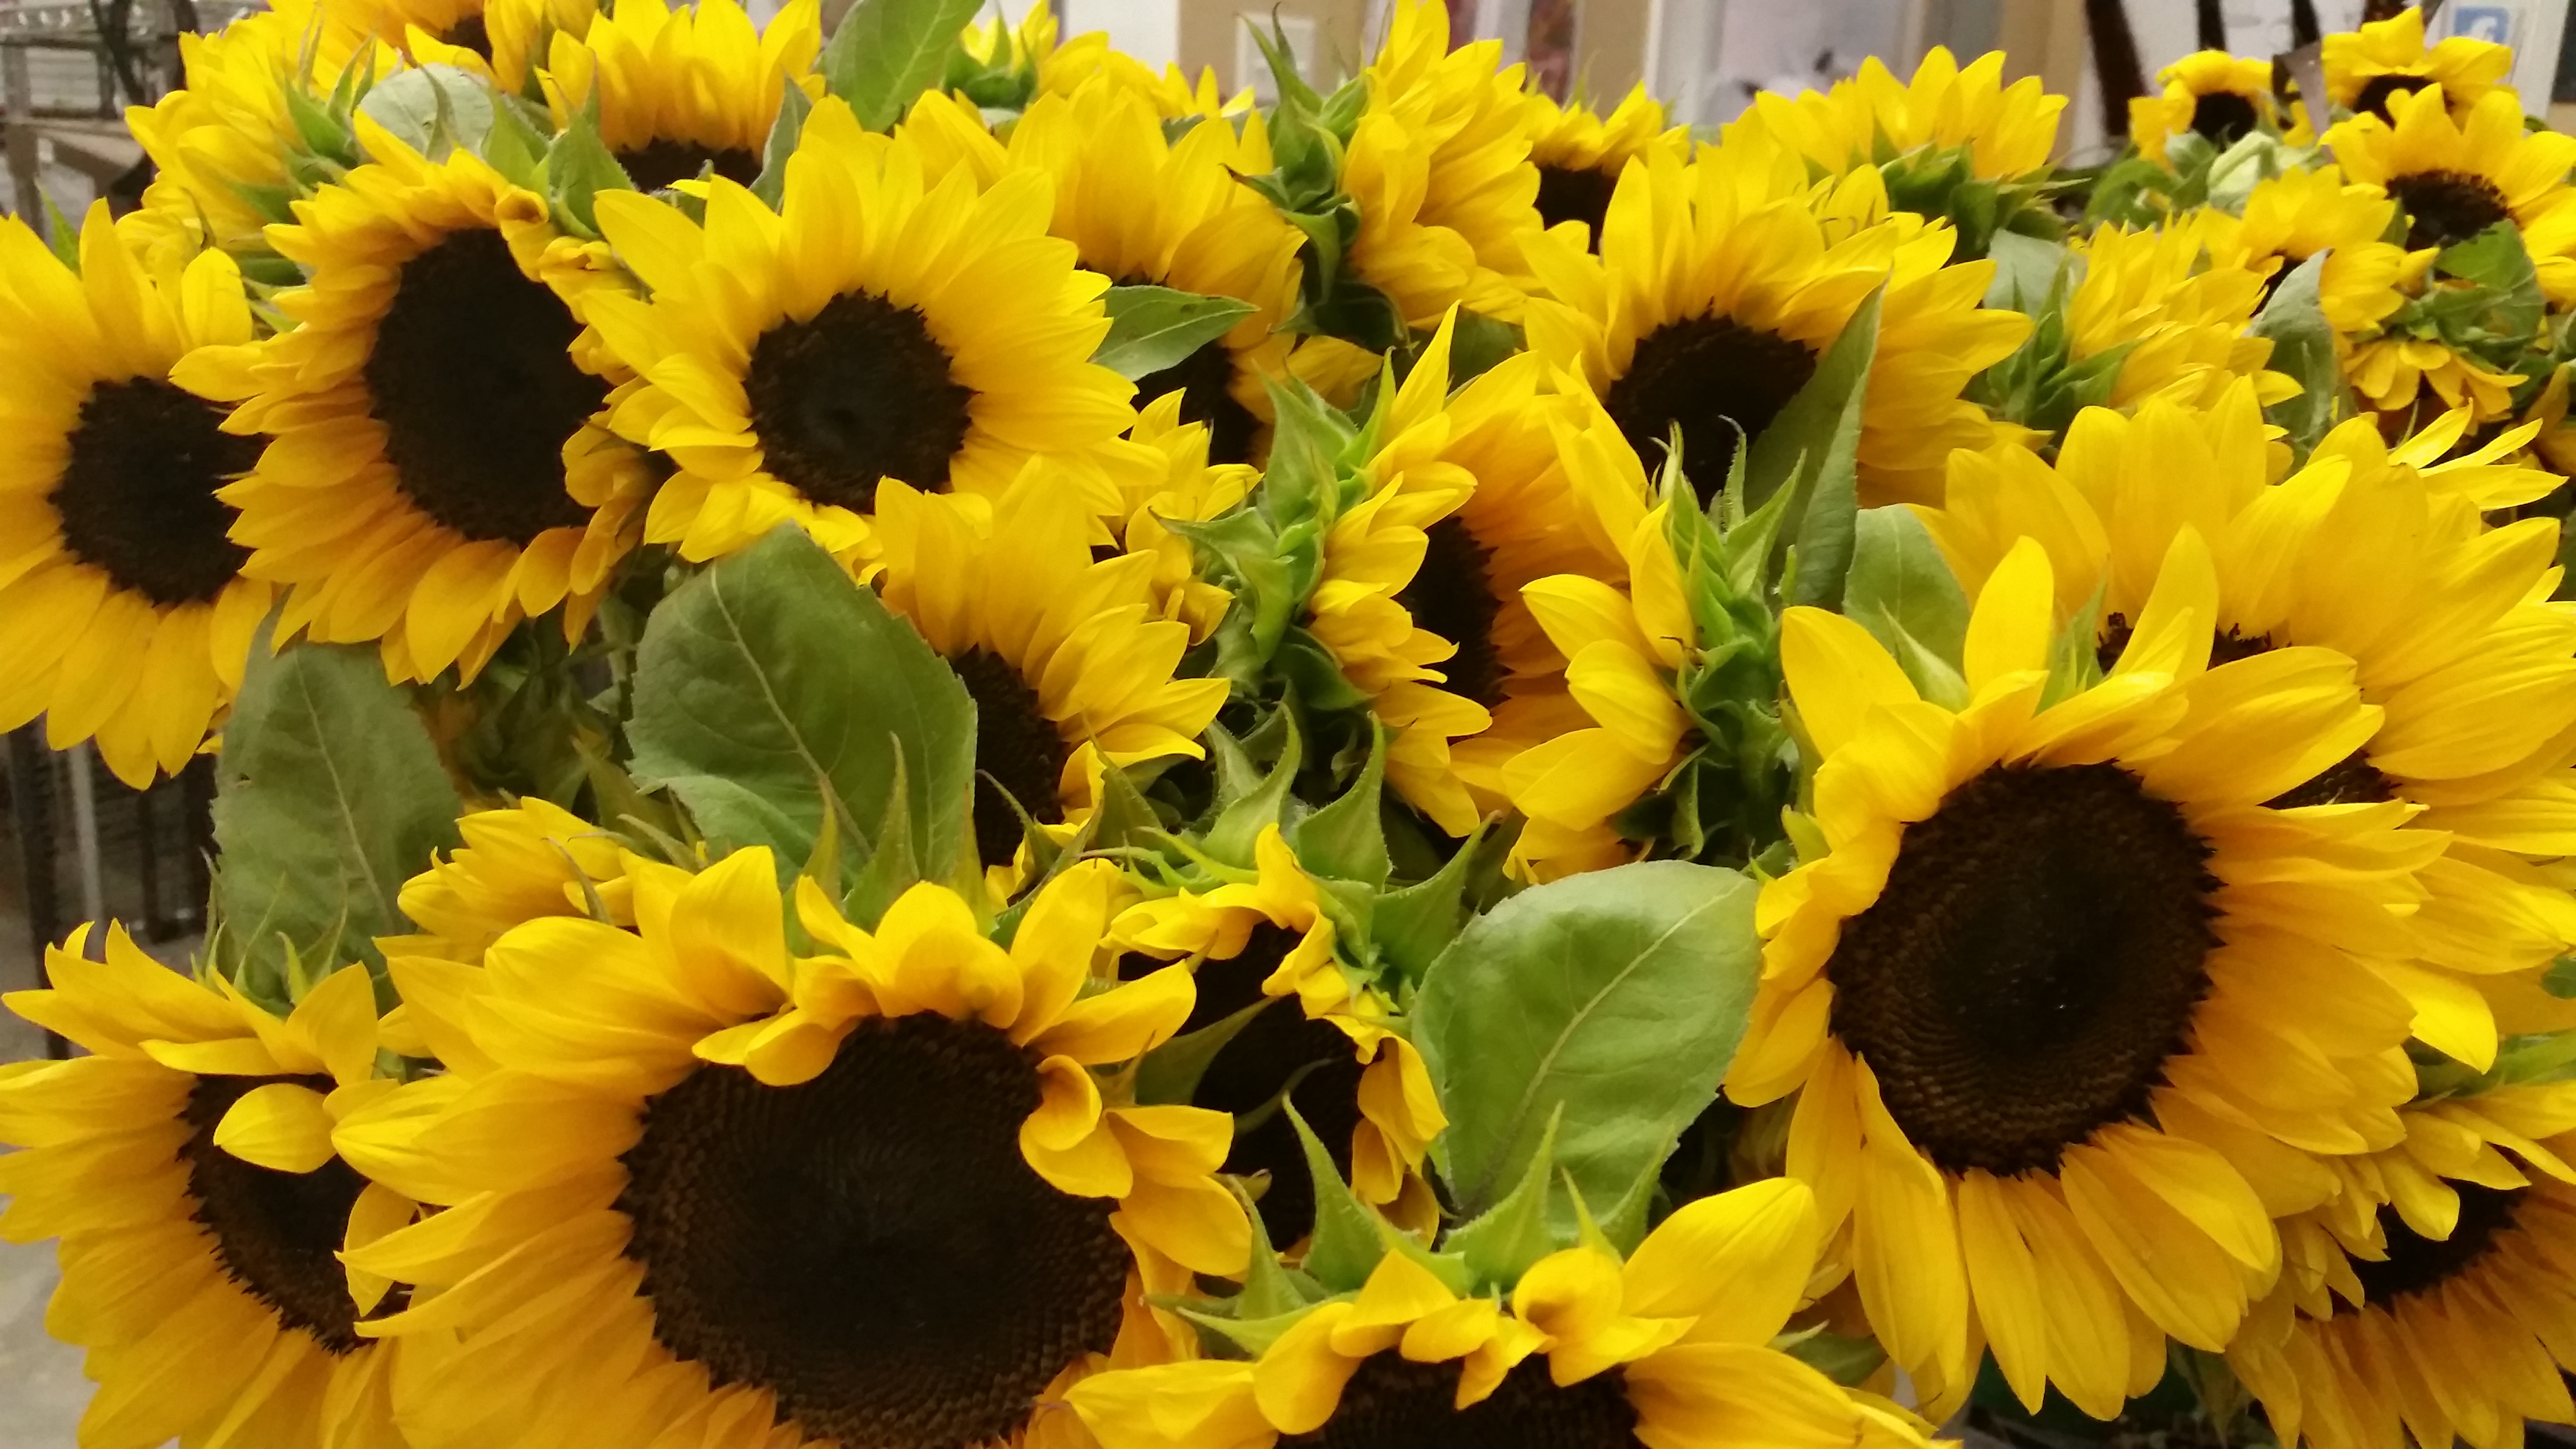 How-to Grow Sunflowers with Small or Big Blooms